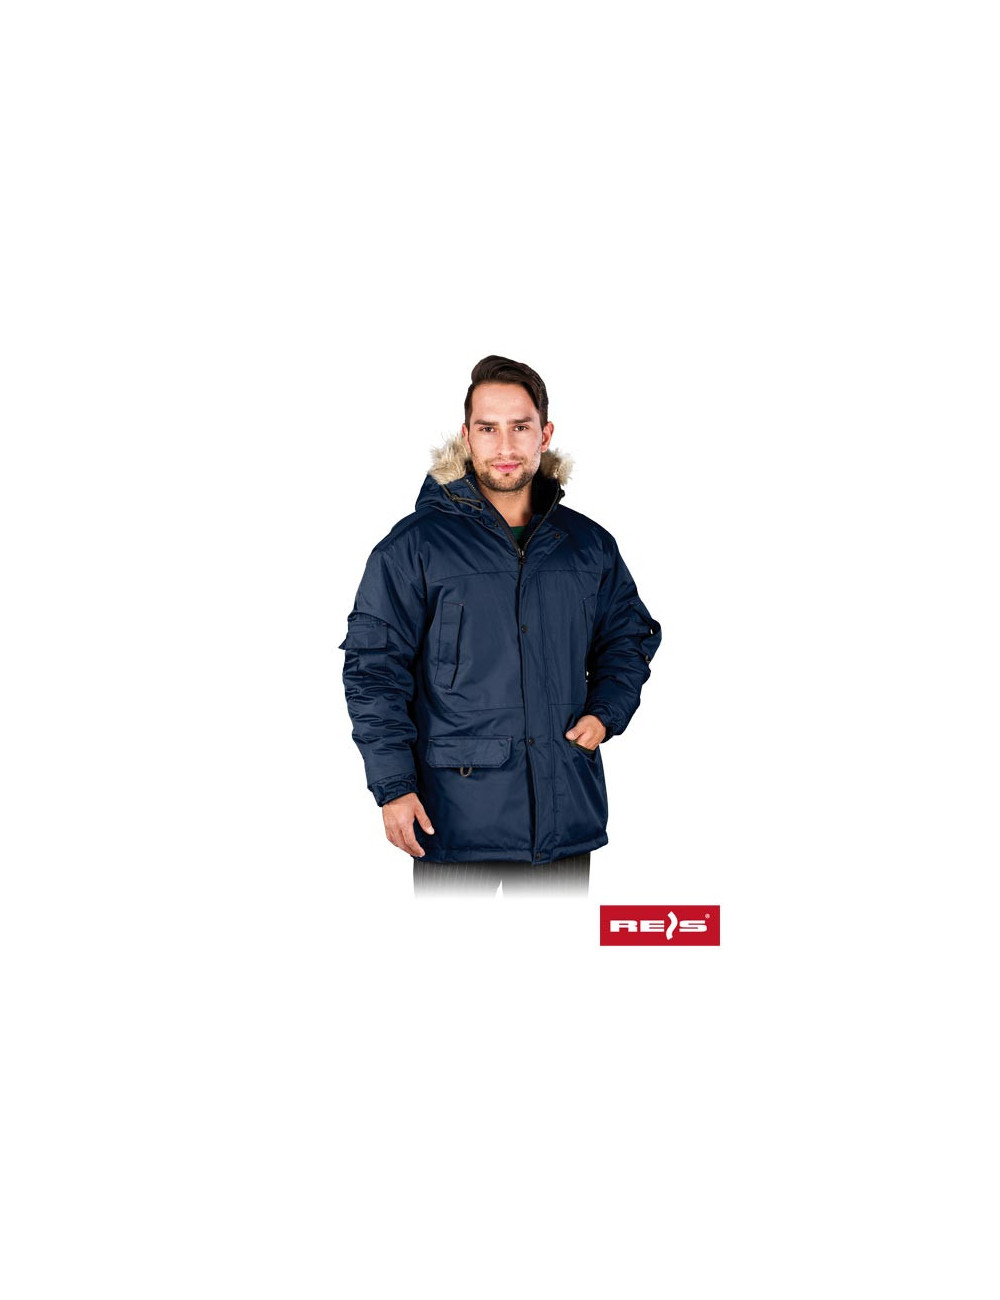 Protective jacket insulated grohol g navy Reis